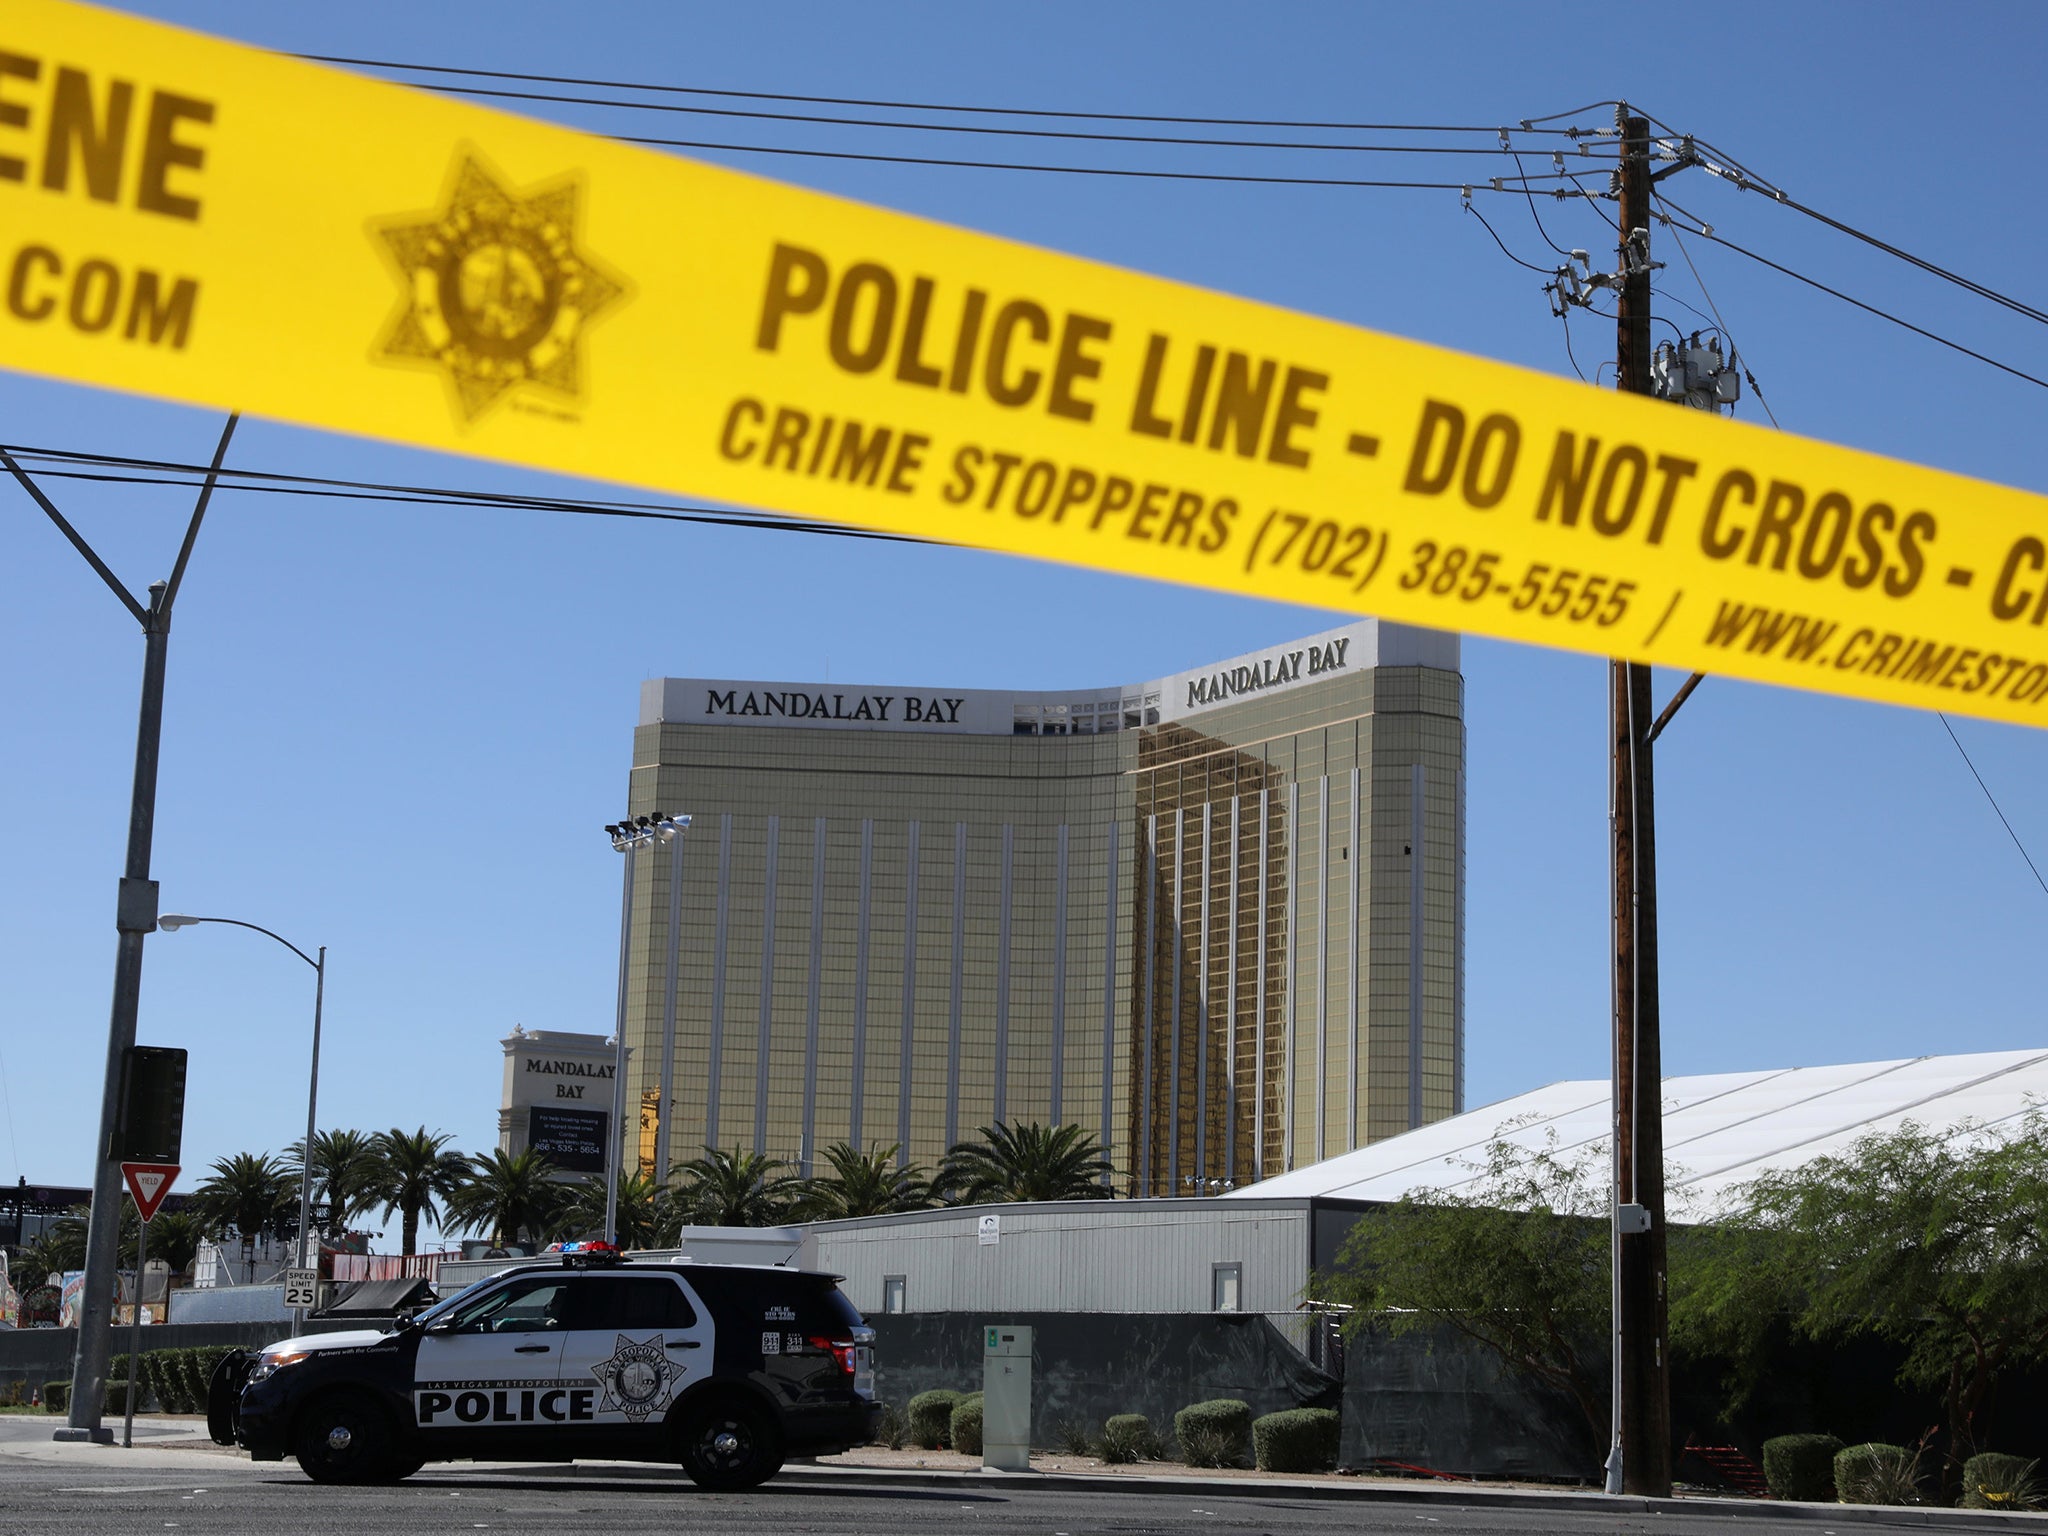 Stephen Paddock shot dead many people attending the Route 91 music festival